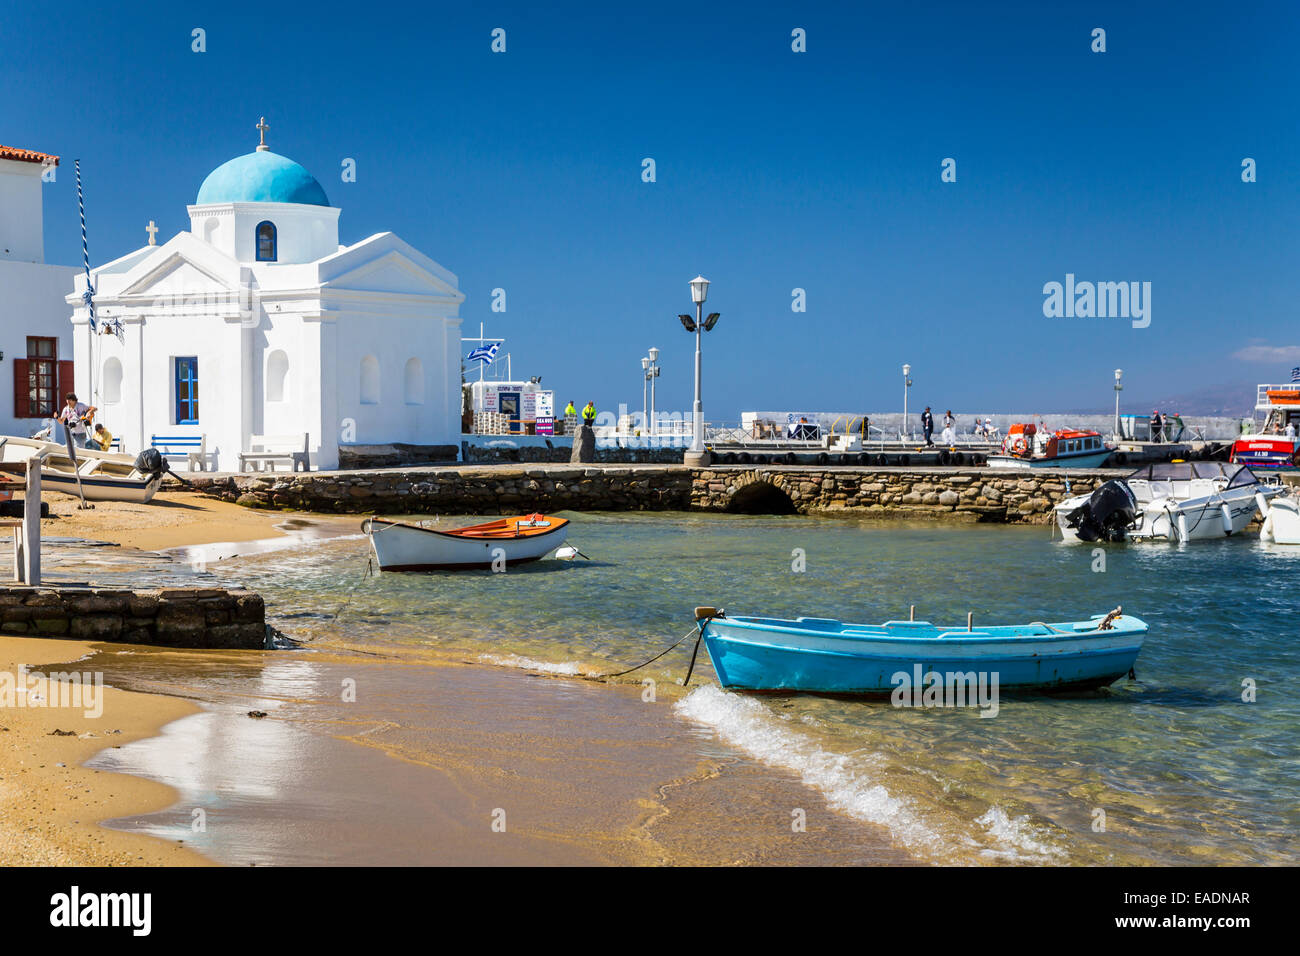 The small harbor and church in the village of Chora, Greek island, Mykonos, Greece, Europe. Stock Photo